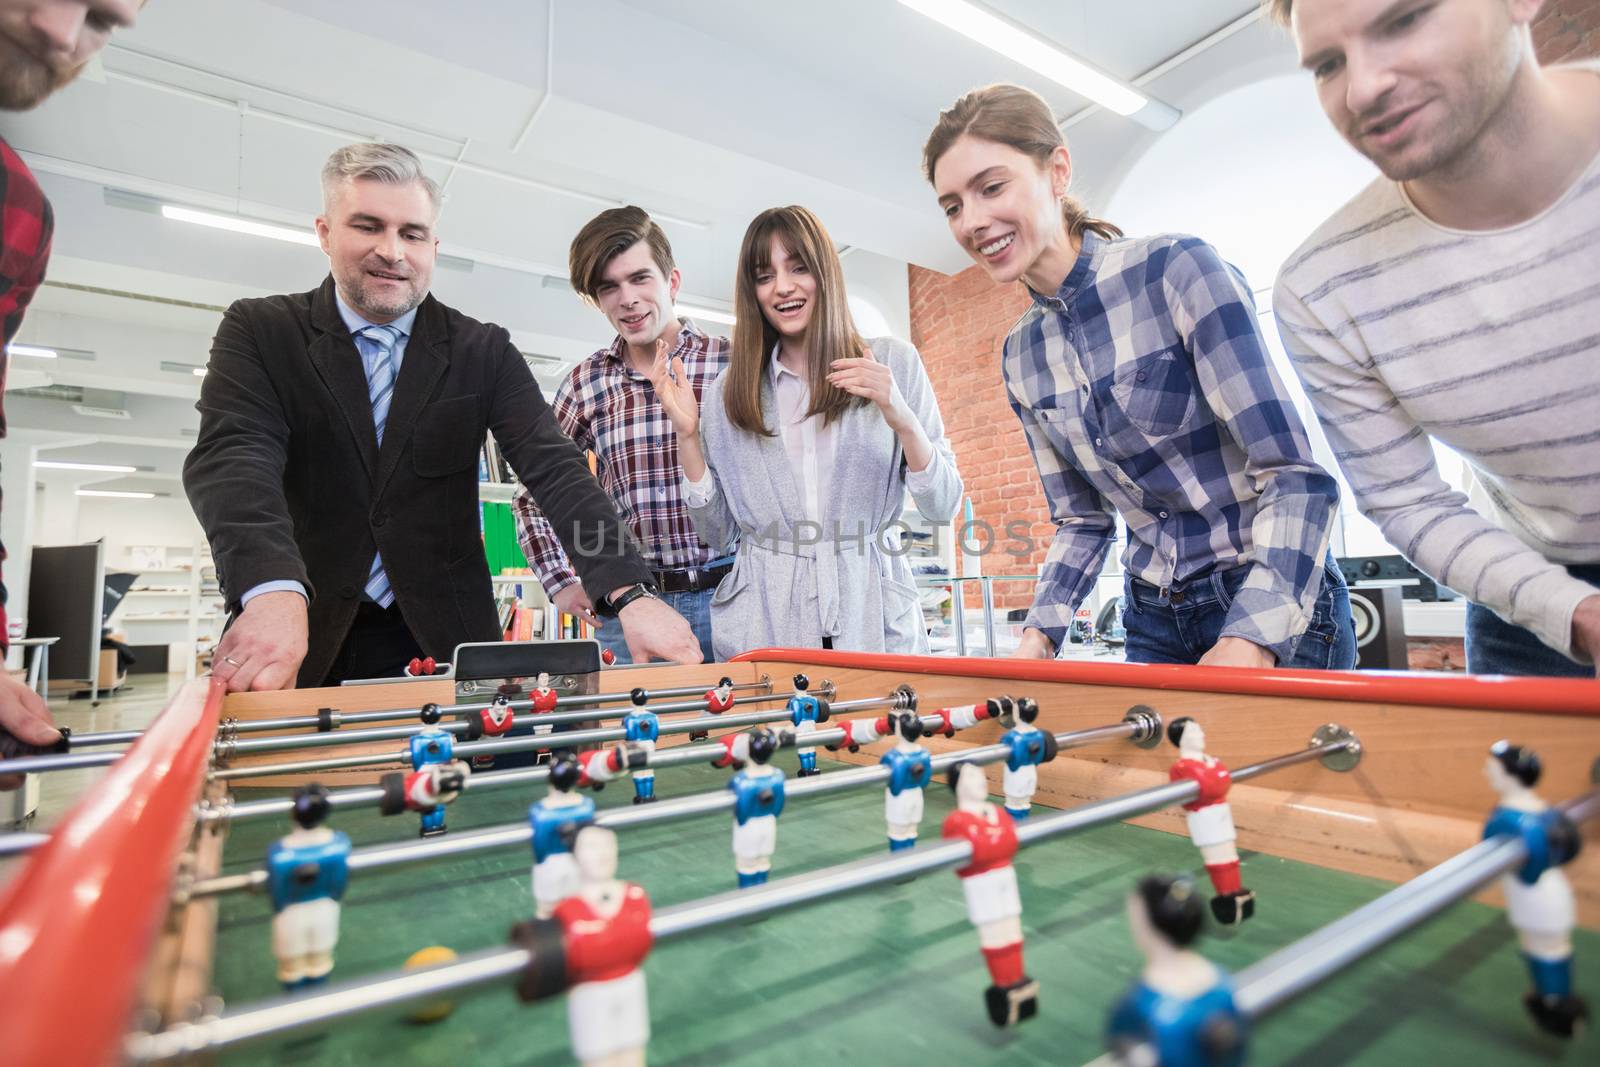 Employees playing table soccer by Yellowj